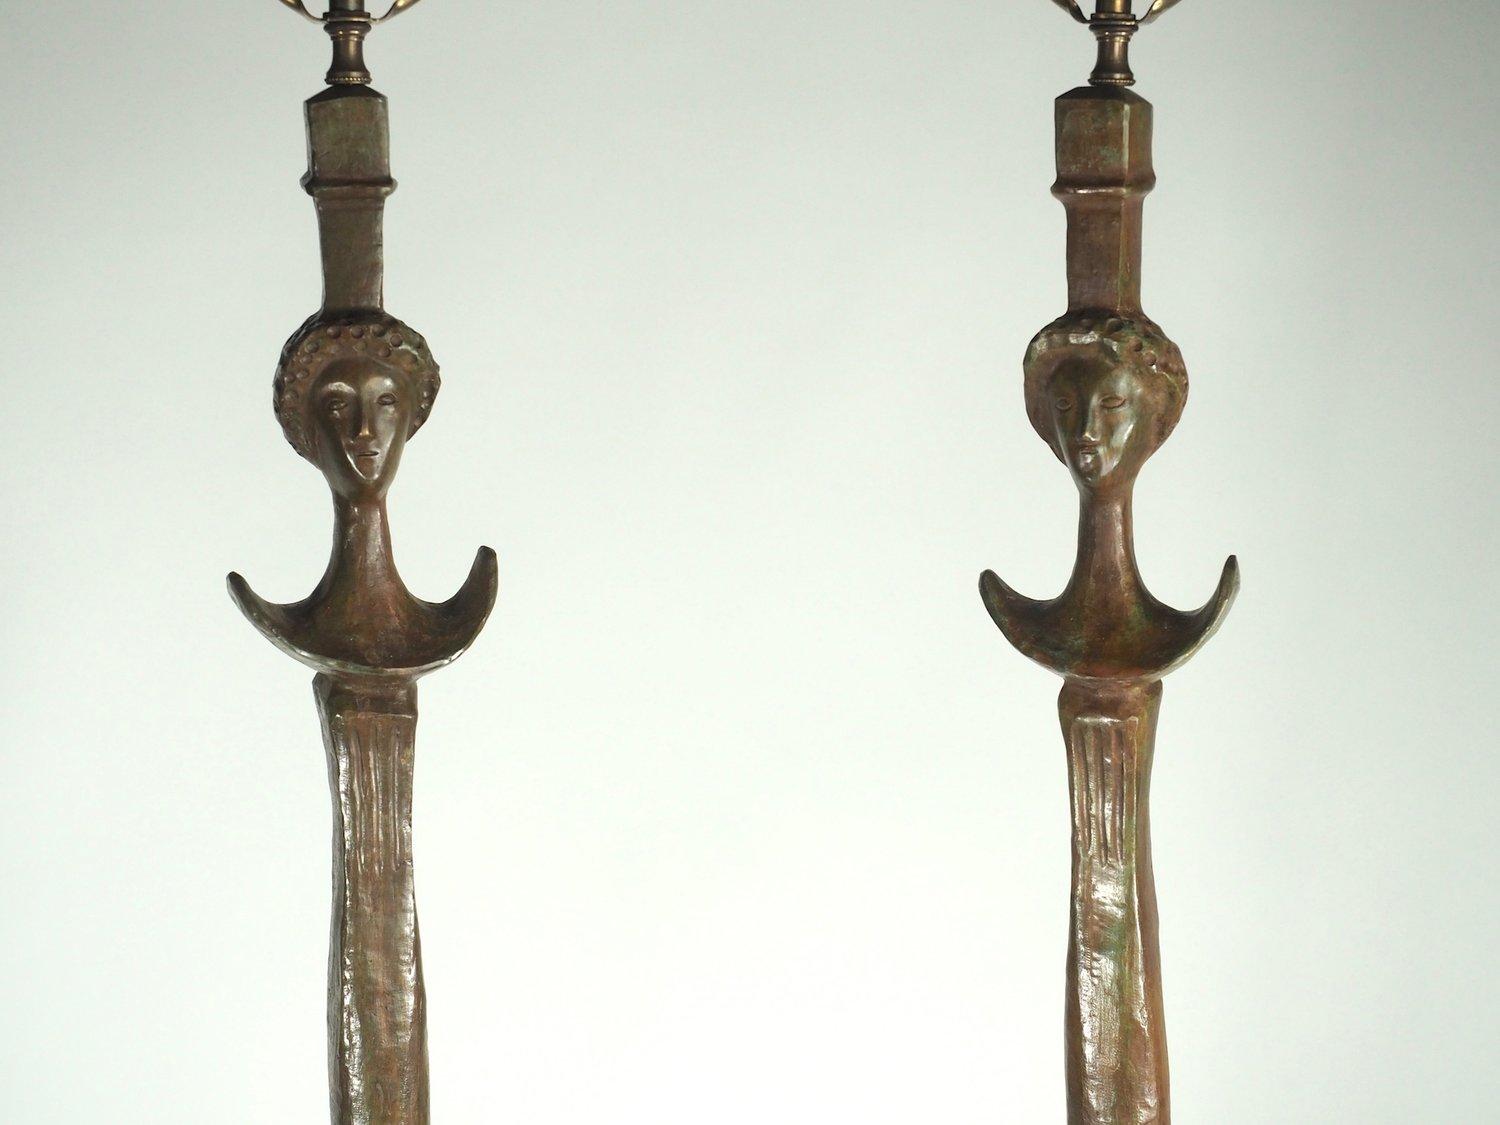 French, 20th century, pair of Tete de Femme bronze floor lamps after a model by Alberto Giacometti for Jean-Michel Frank.